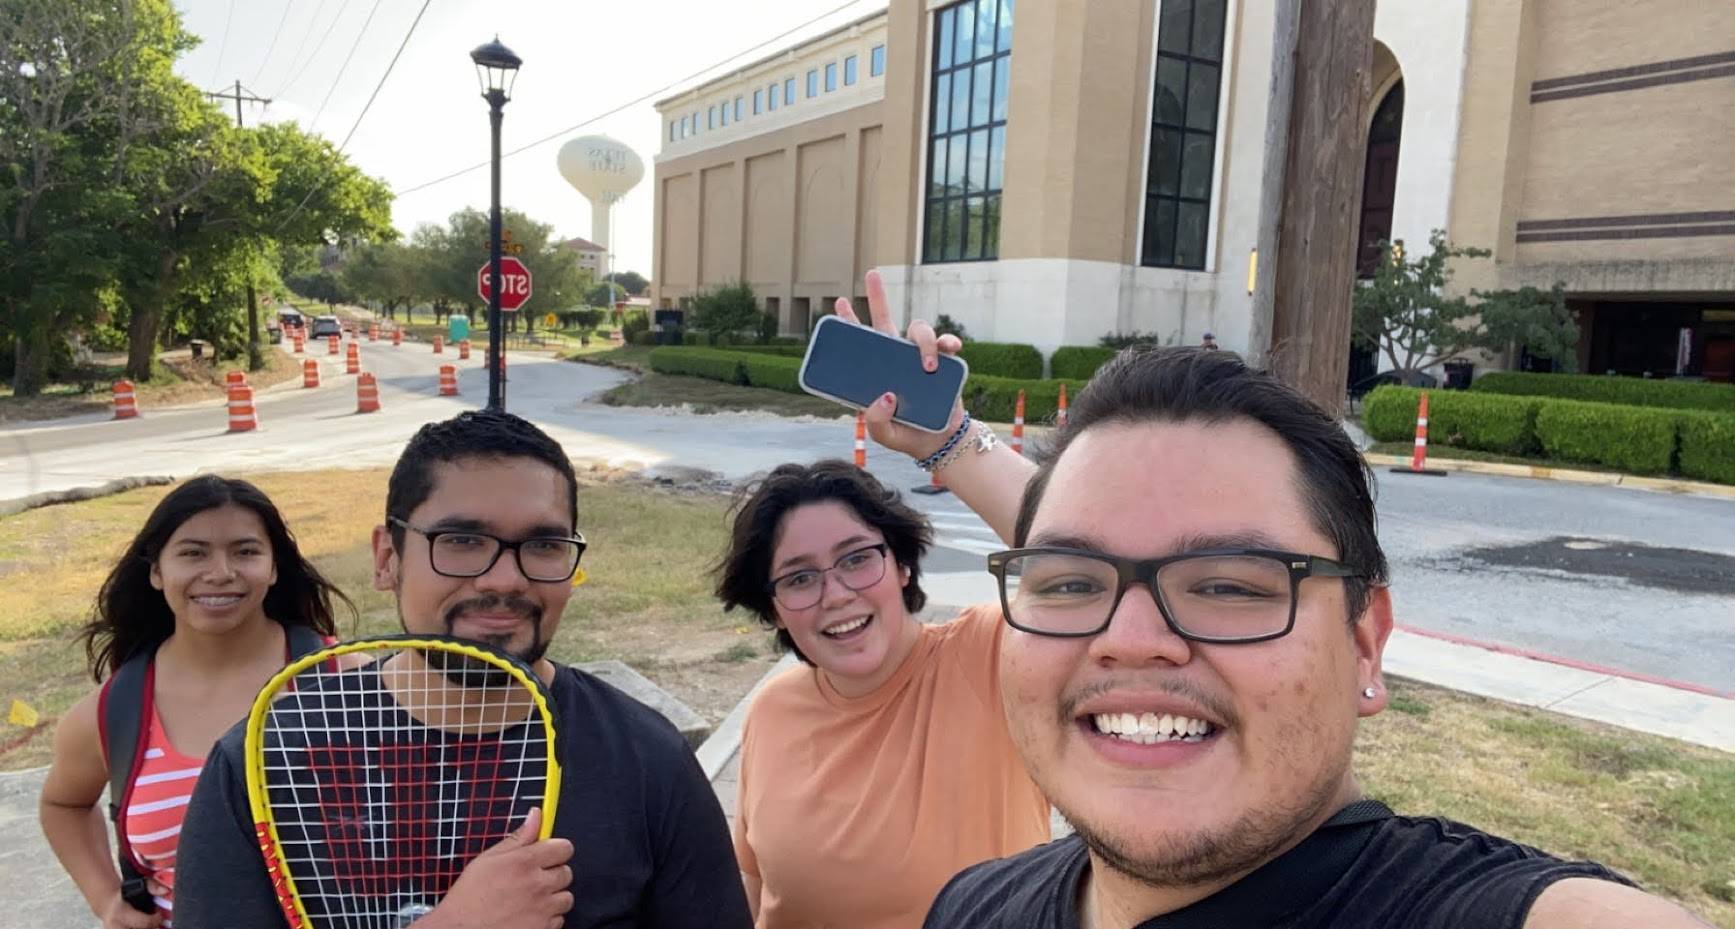 four students in front of Rec Center after a game of doubles tennis